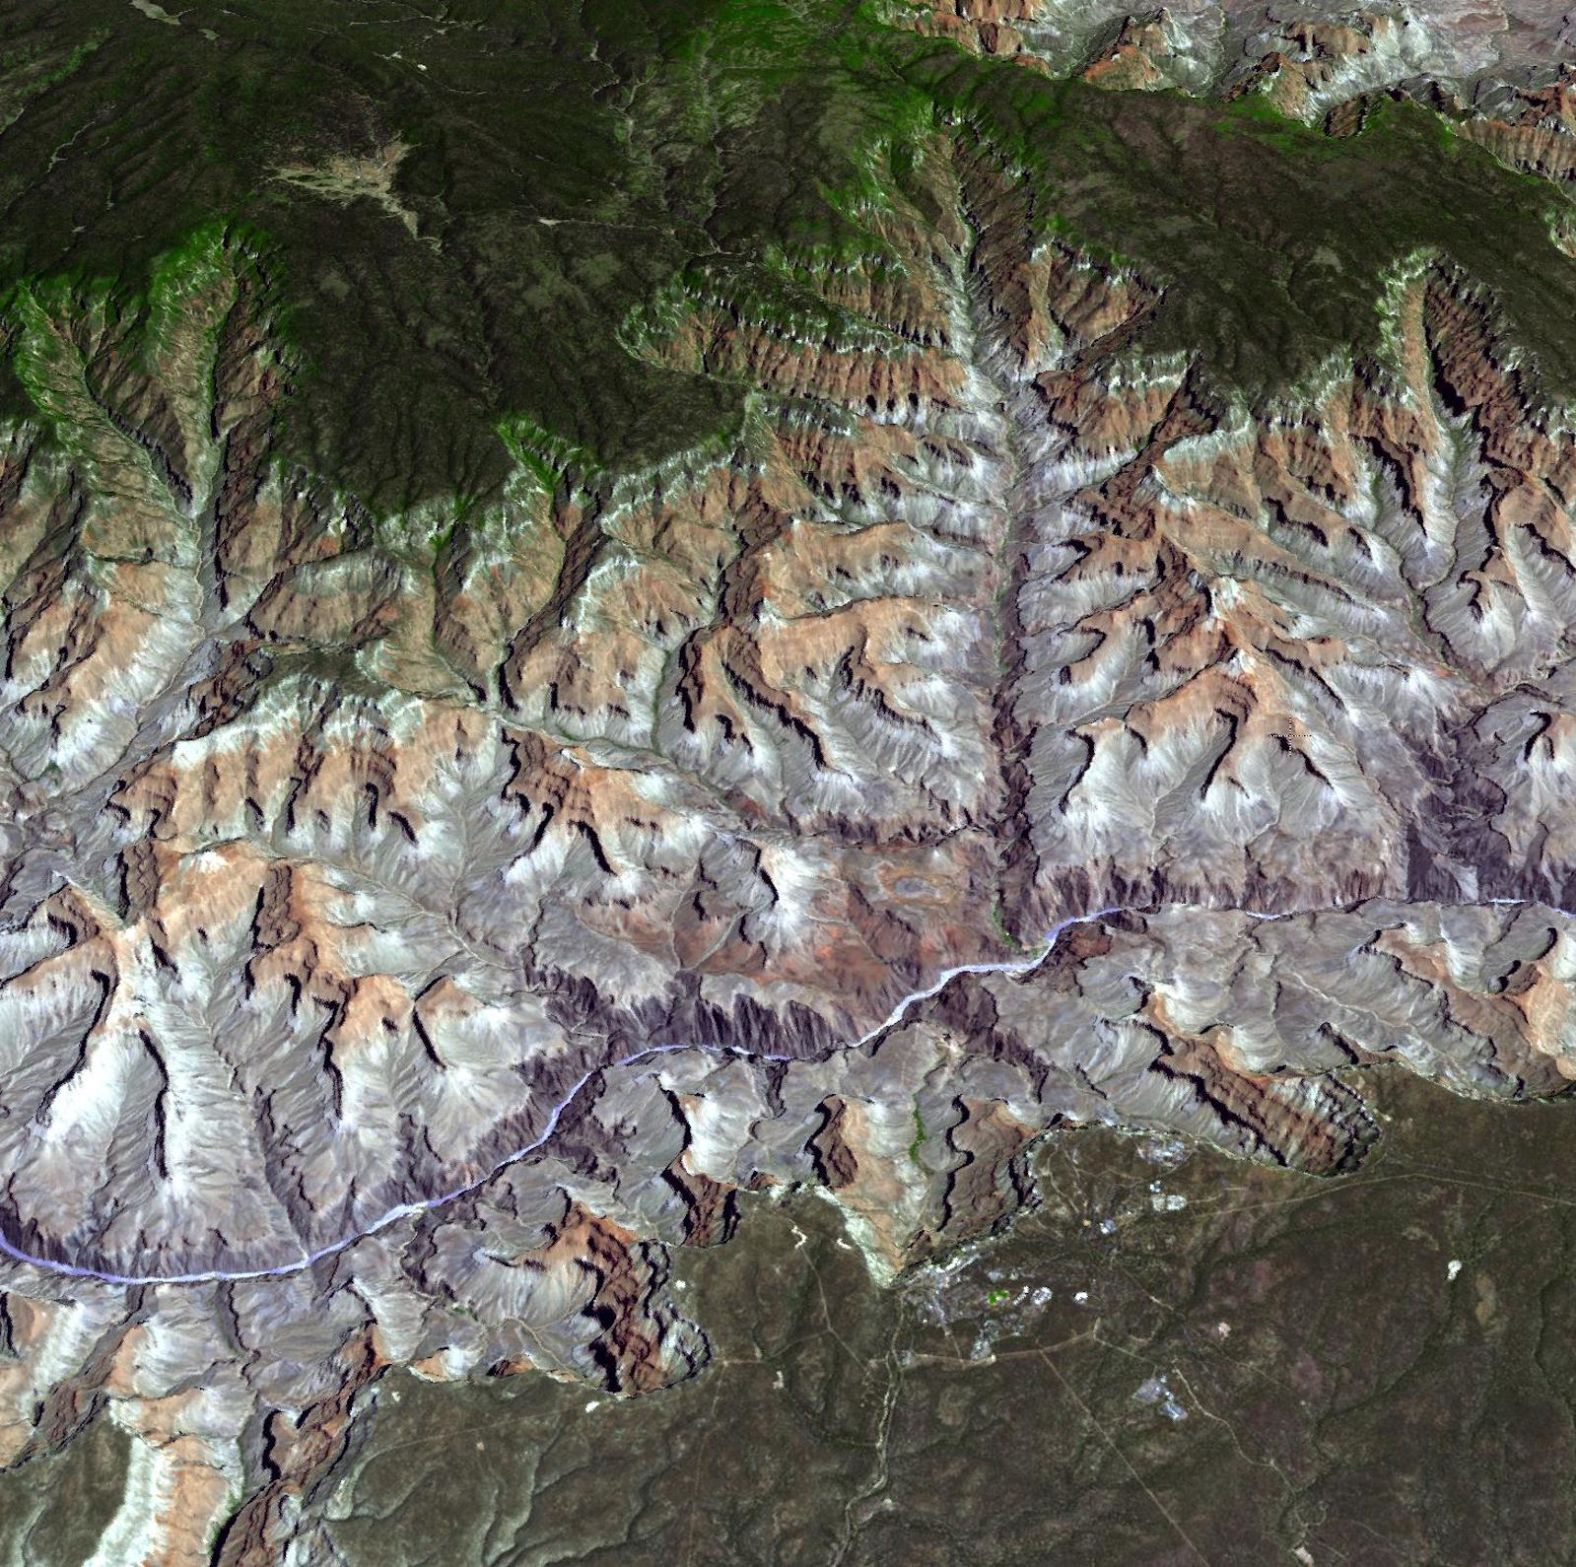 <strong>Grand Canyon National Park, United States:</strong> A marvel of nature, America's most famous national park stretches 277 miles in length and is a mile deep. From NASA's Terra spacecraft, the canyon's veins of red rock look like a work of art.